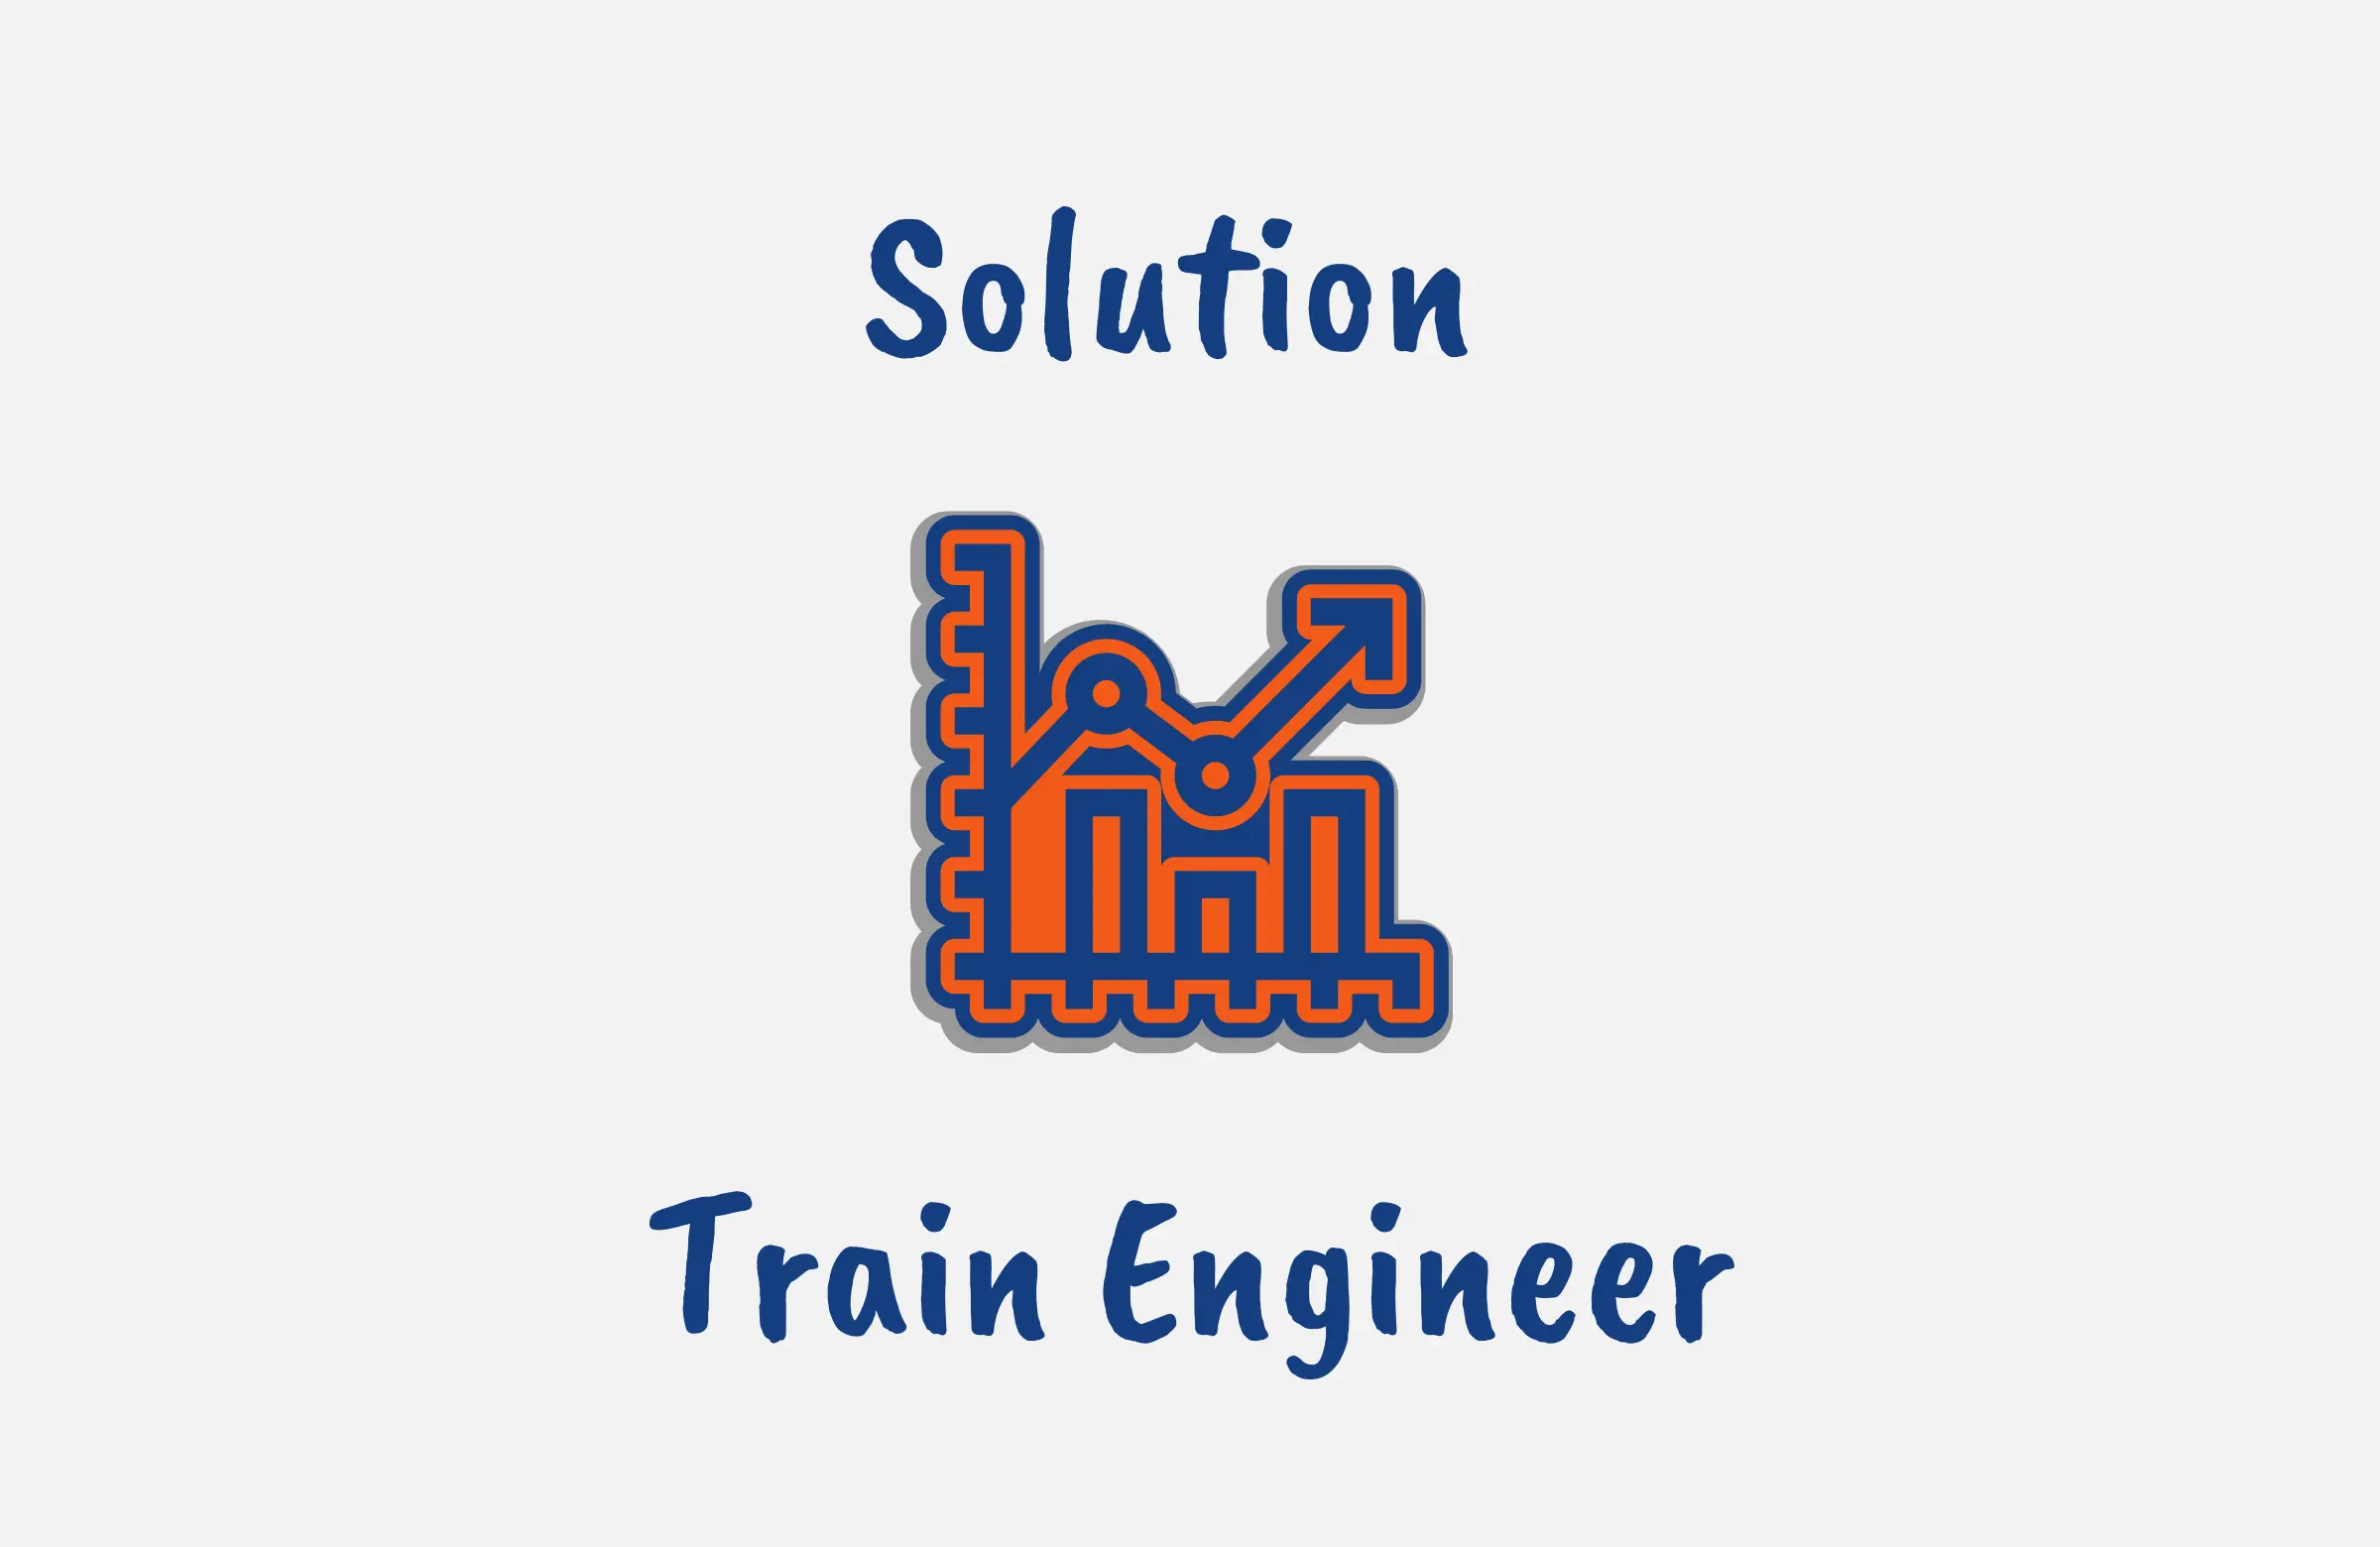 role of the solution train engineer in SAFe